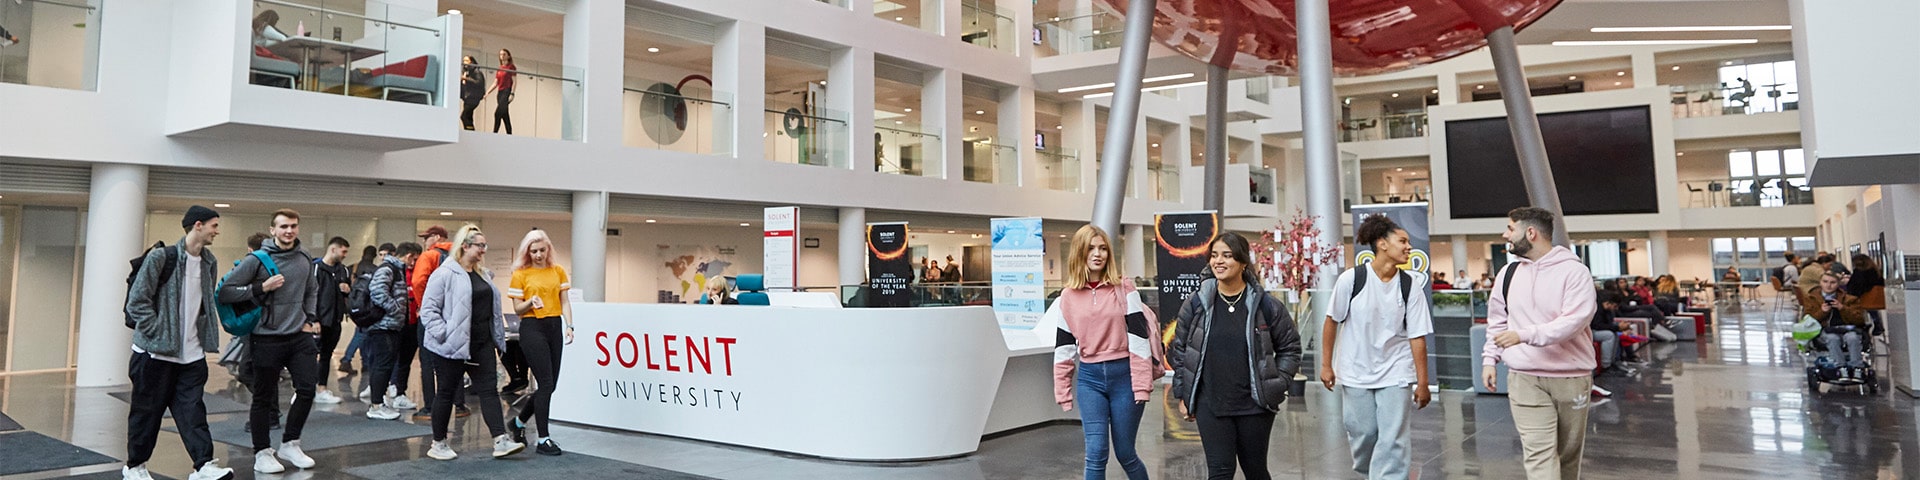 Students in The Spark at Solent University.